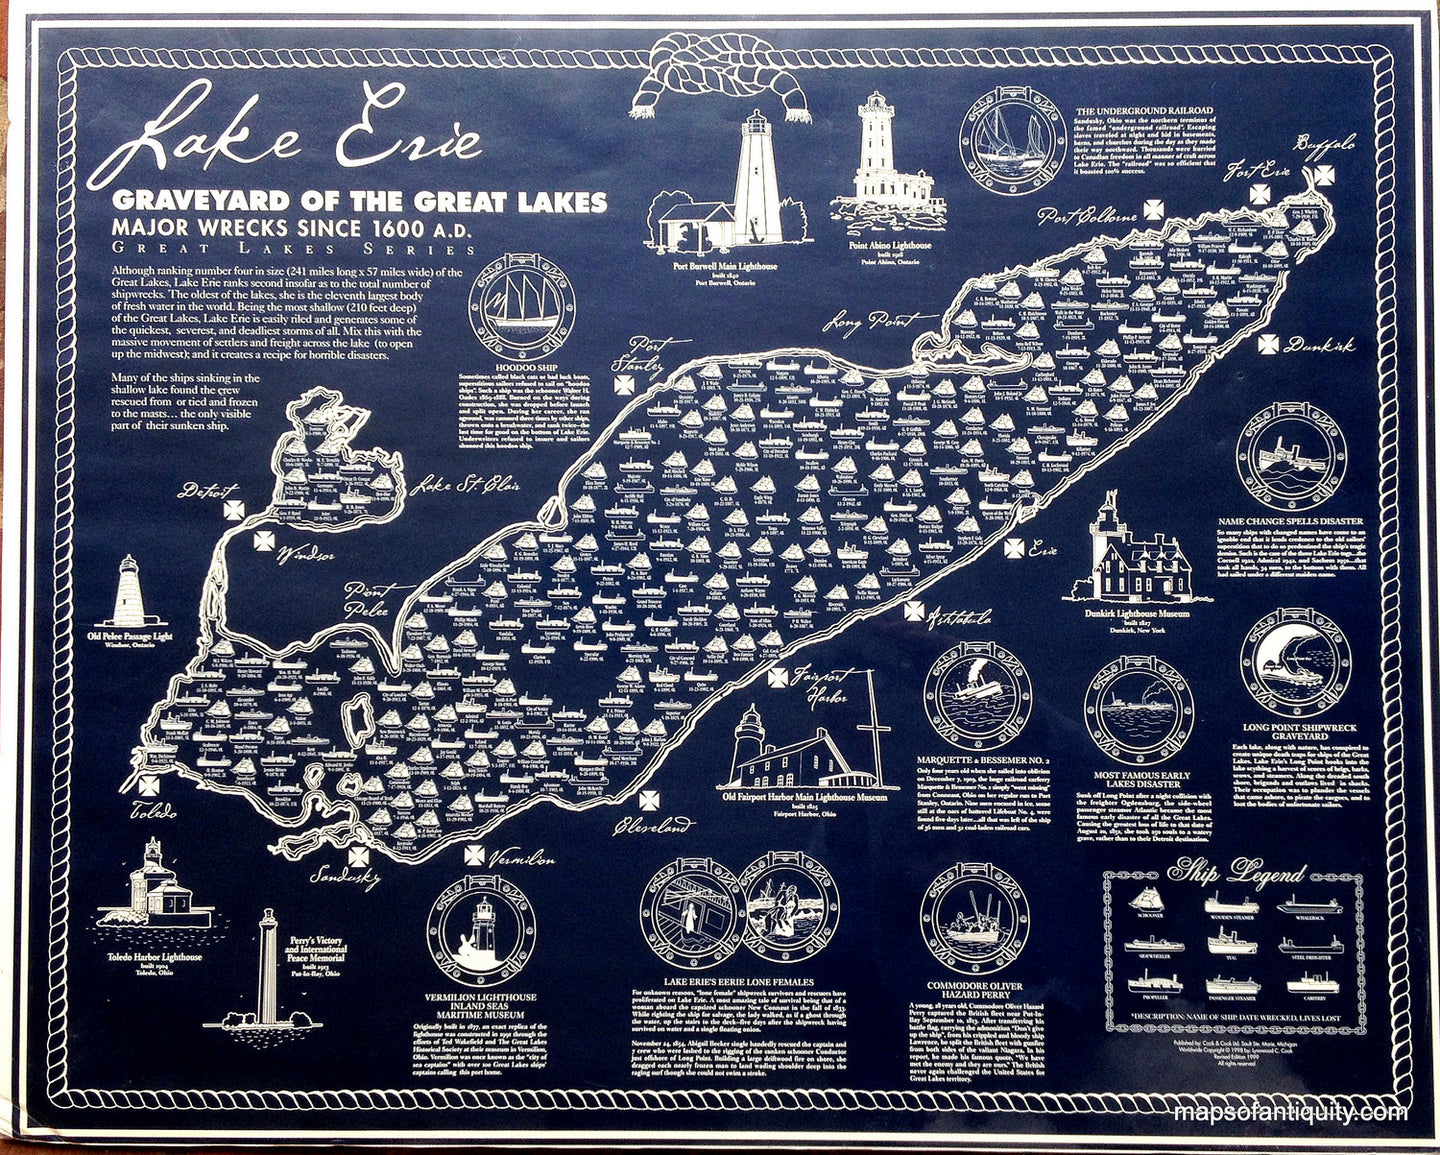 Printed-Color-Map-Lake-Erie-Graveyard-of-the-Great-Lakes-Major-Wrecks-Since-1600-A.D.-******-United-States--1999-Cook-&-Cook-Maps-Of-Antiquity